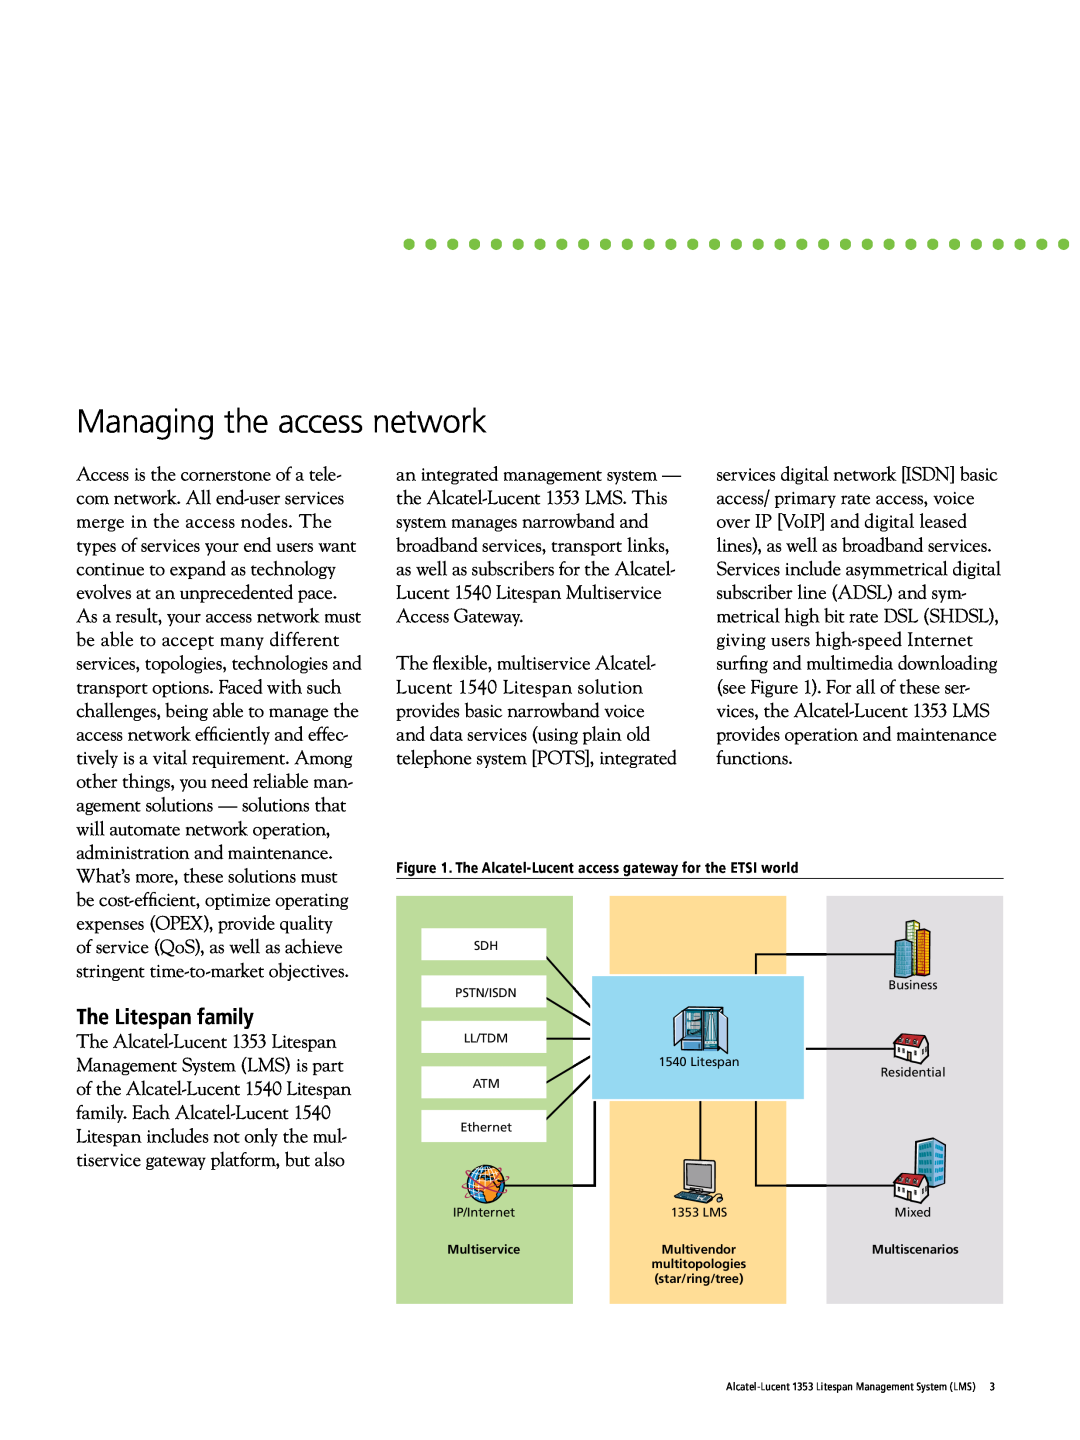 Alcatel-Lucent 1353 manual Managing the access network, The Litespan family 